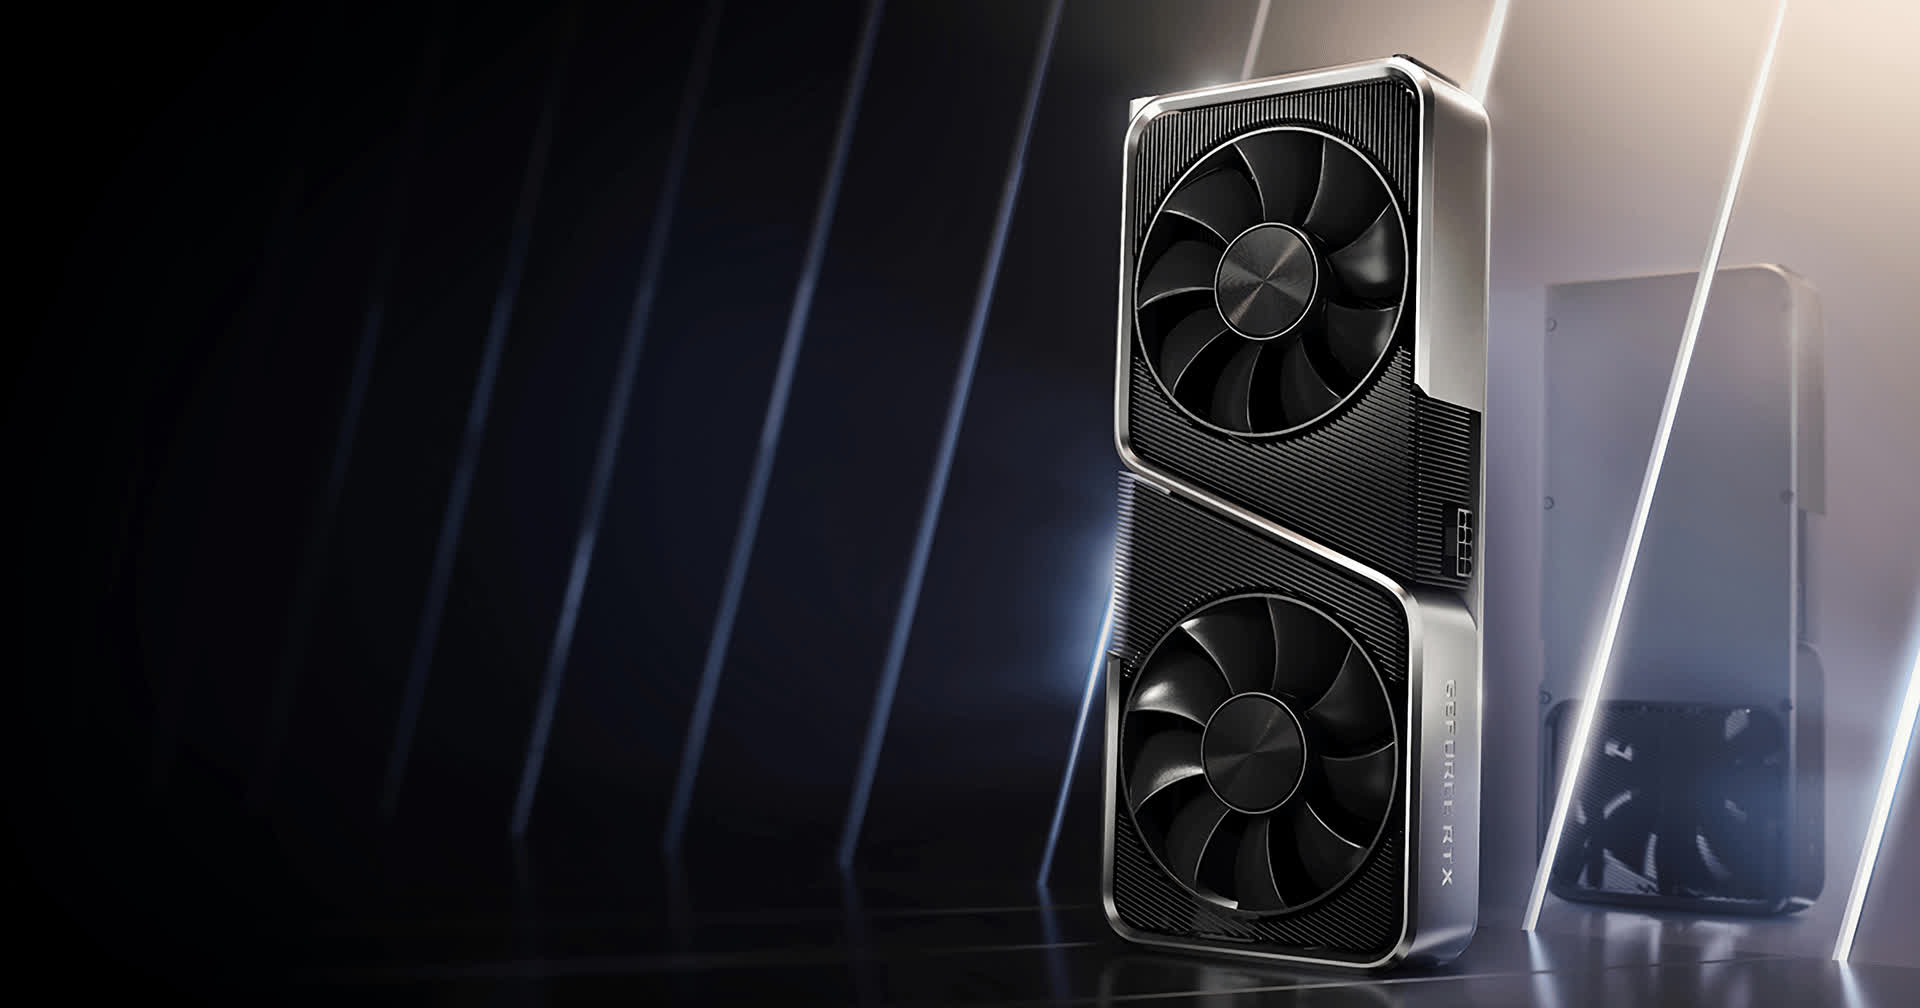 Nvidia moves RTX 3070 launch to October 29